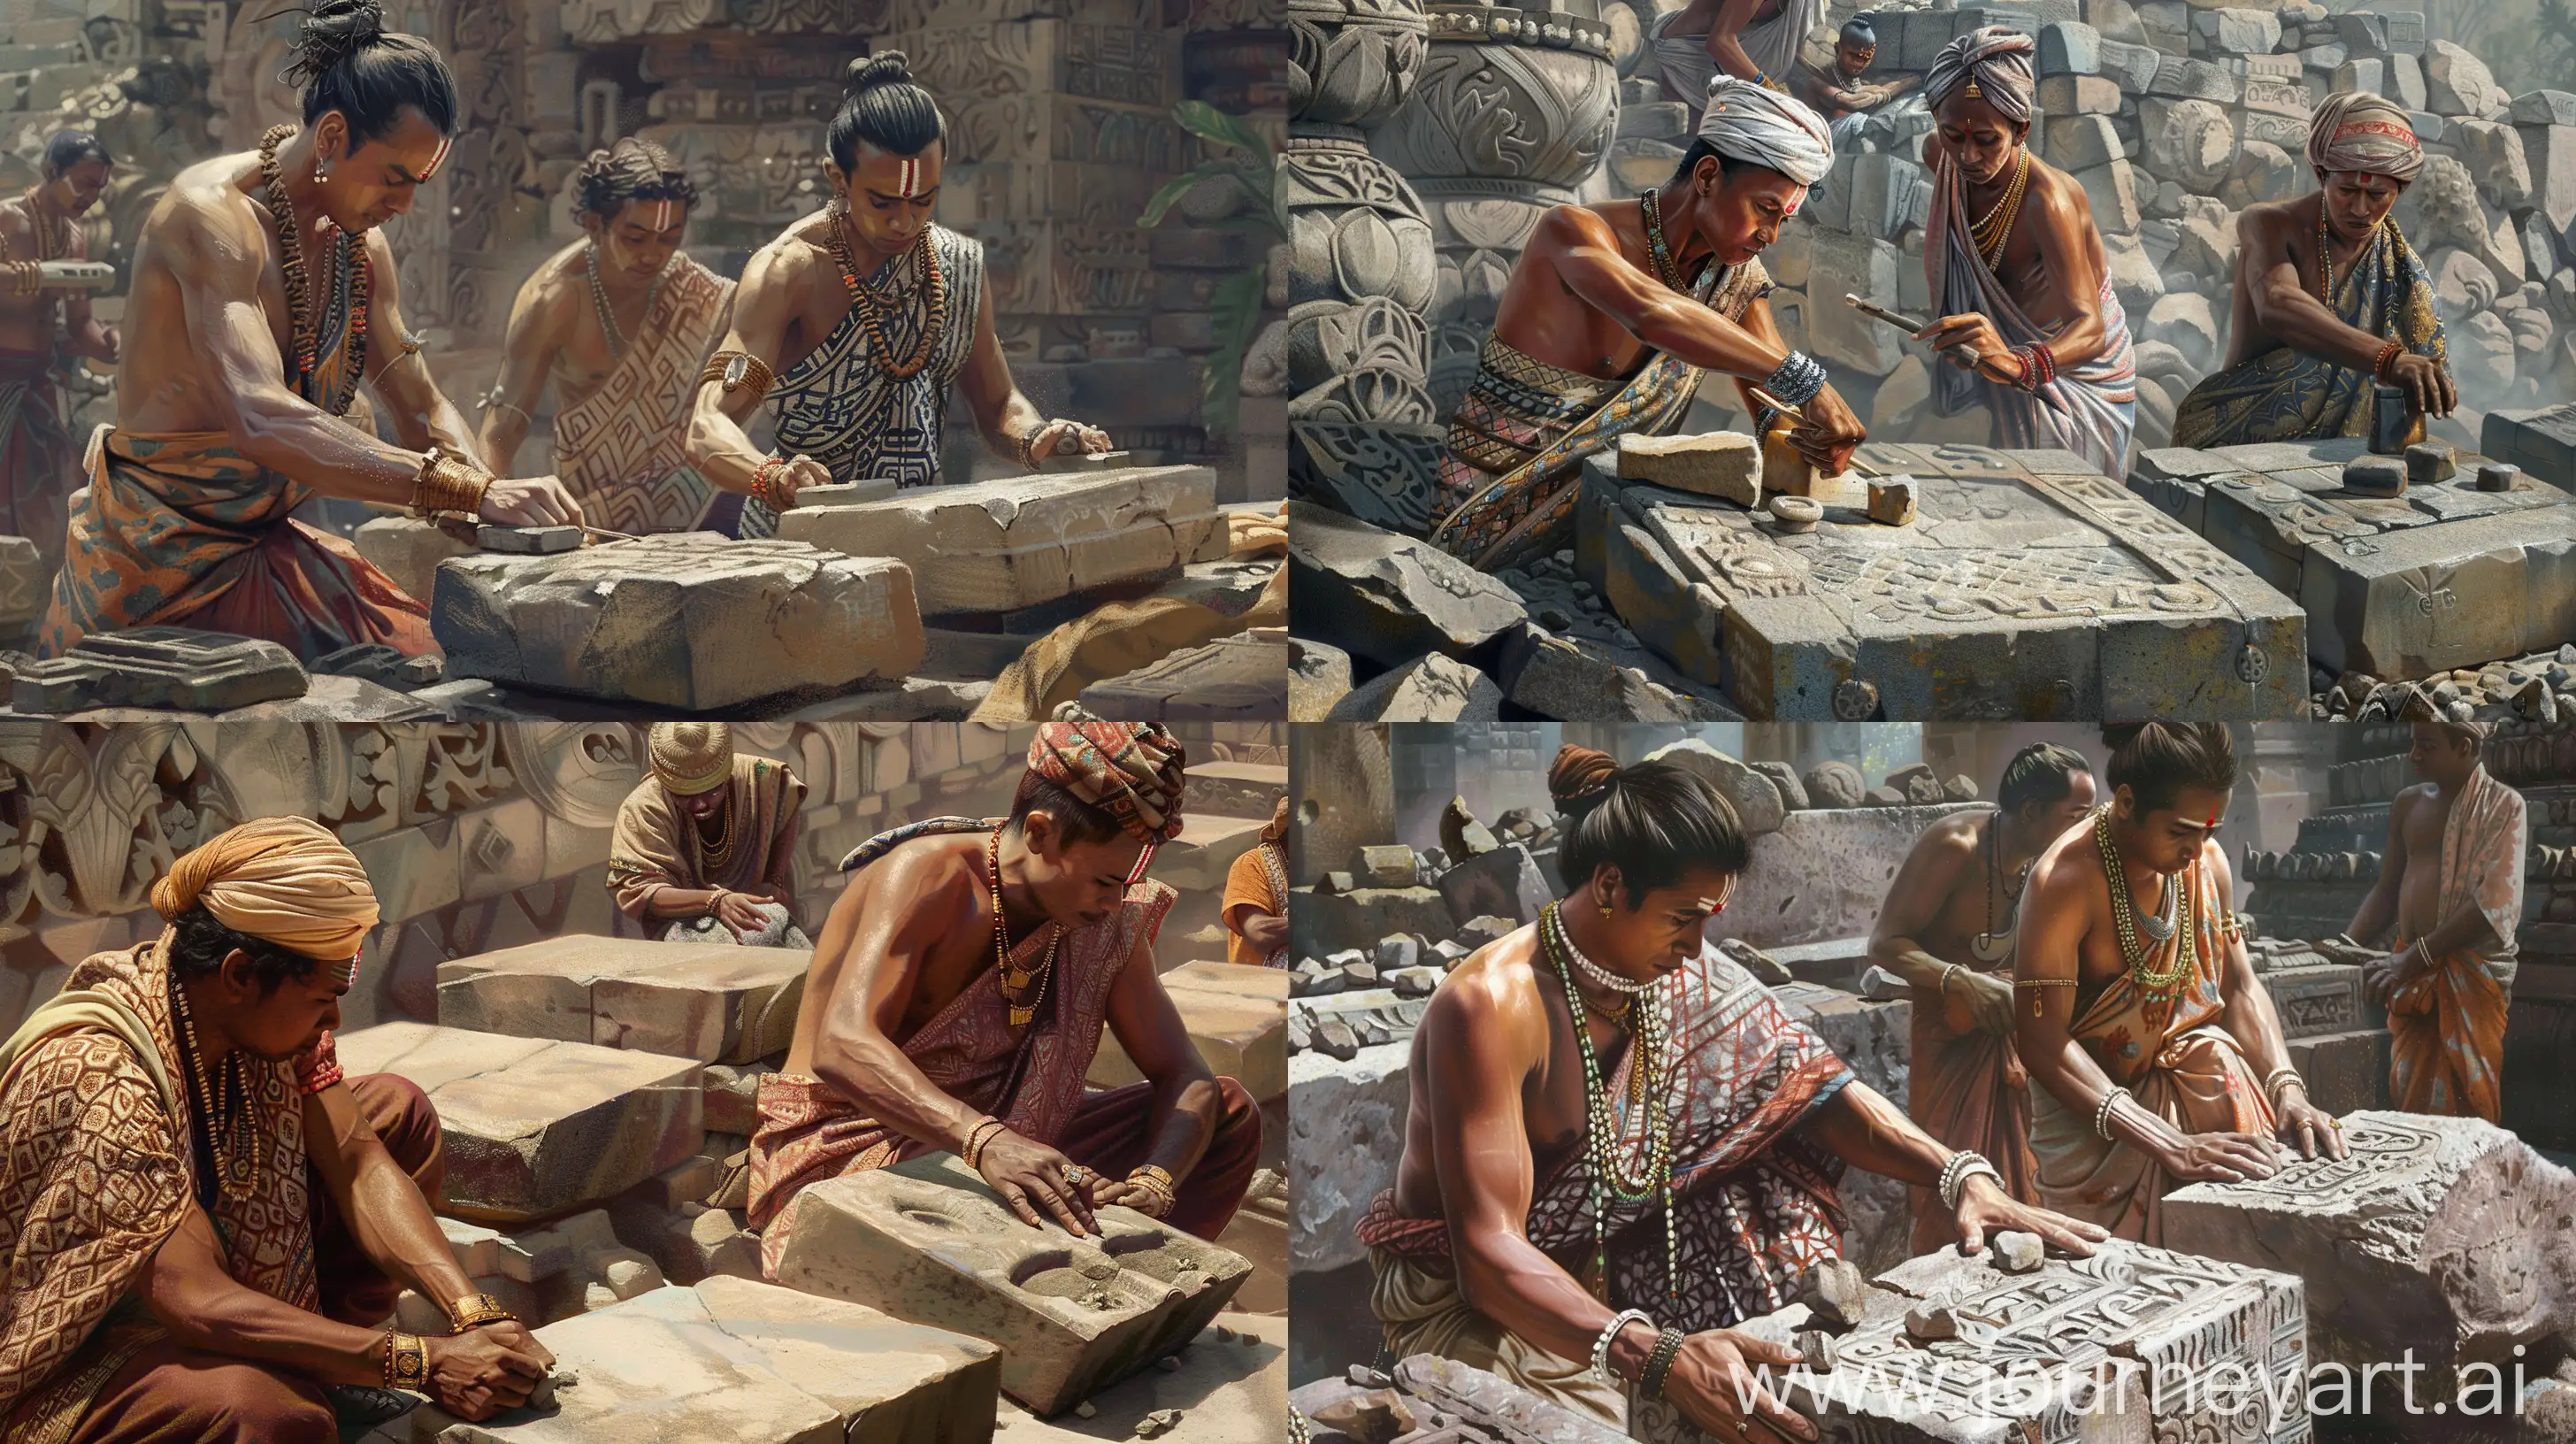 Traditional-Hindu-Workers-Carving-Andesite-Stones-at-Borobudur-Temple-8th-Century